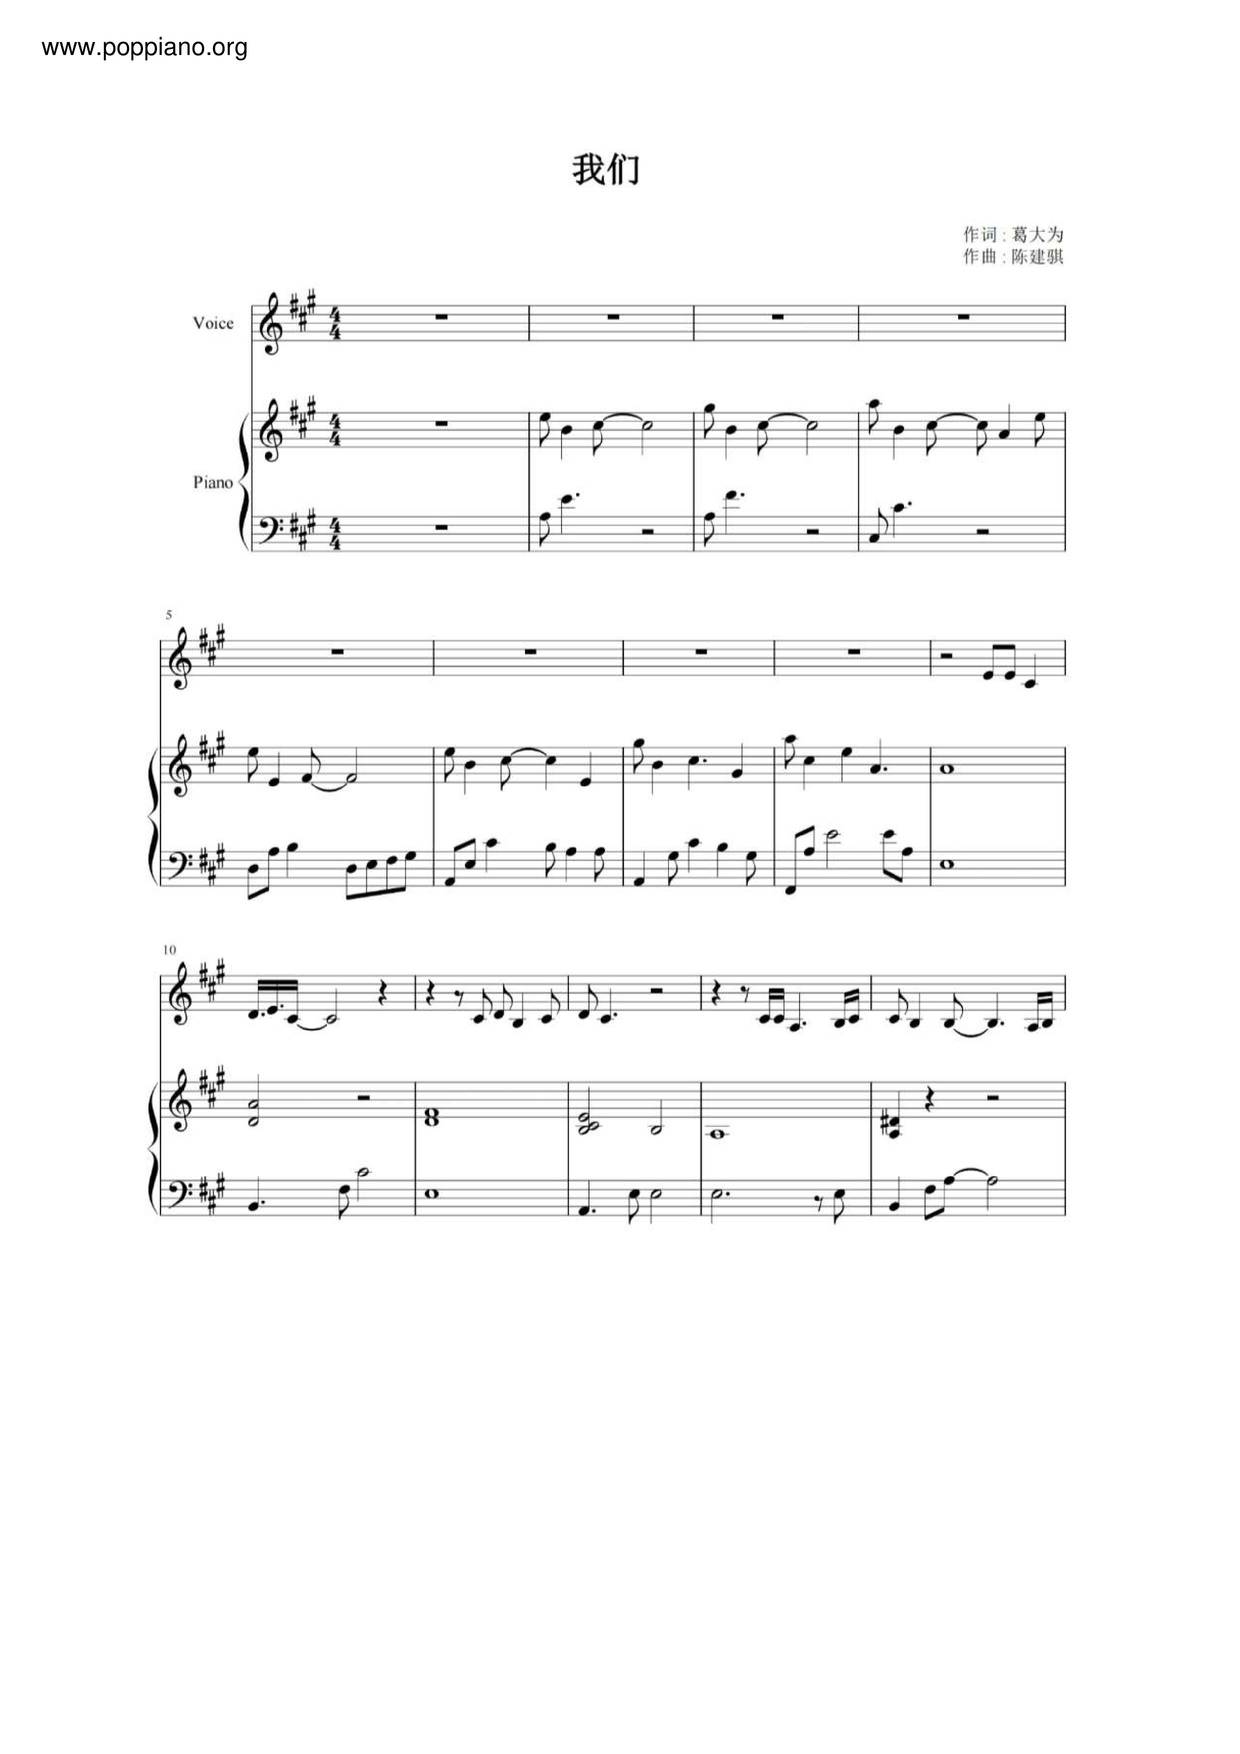 Us (The Theme Song Of The Movie "Later Us") Score